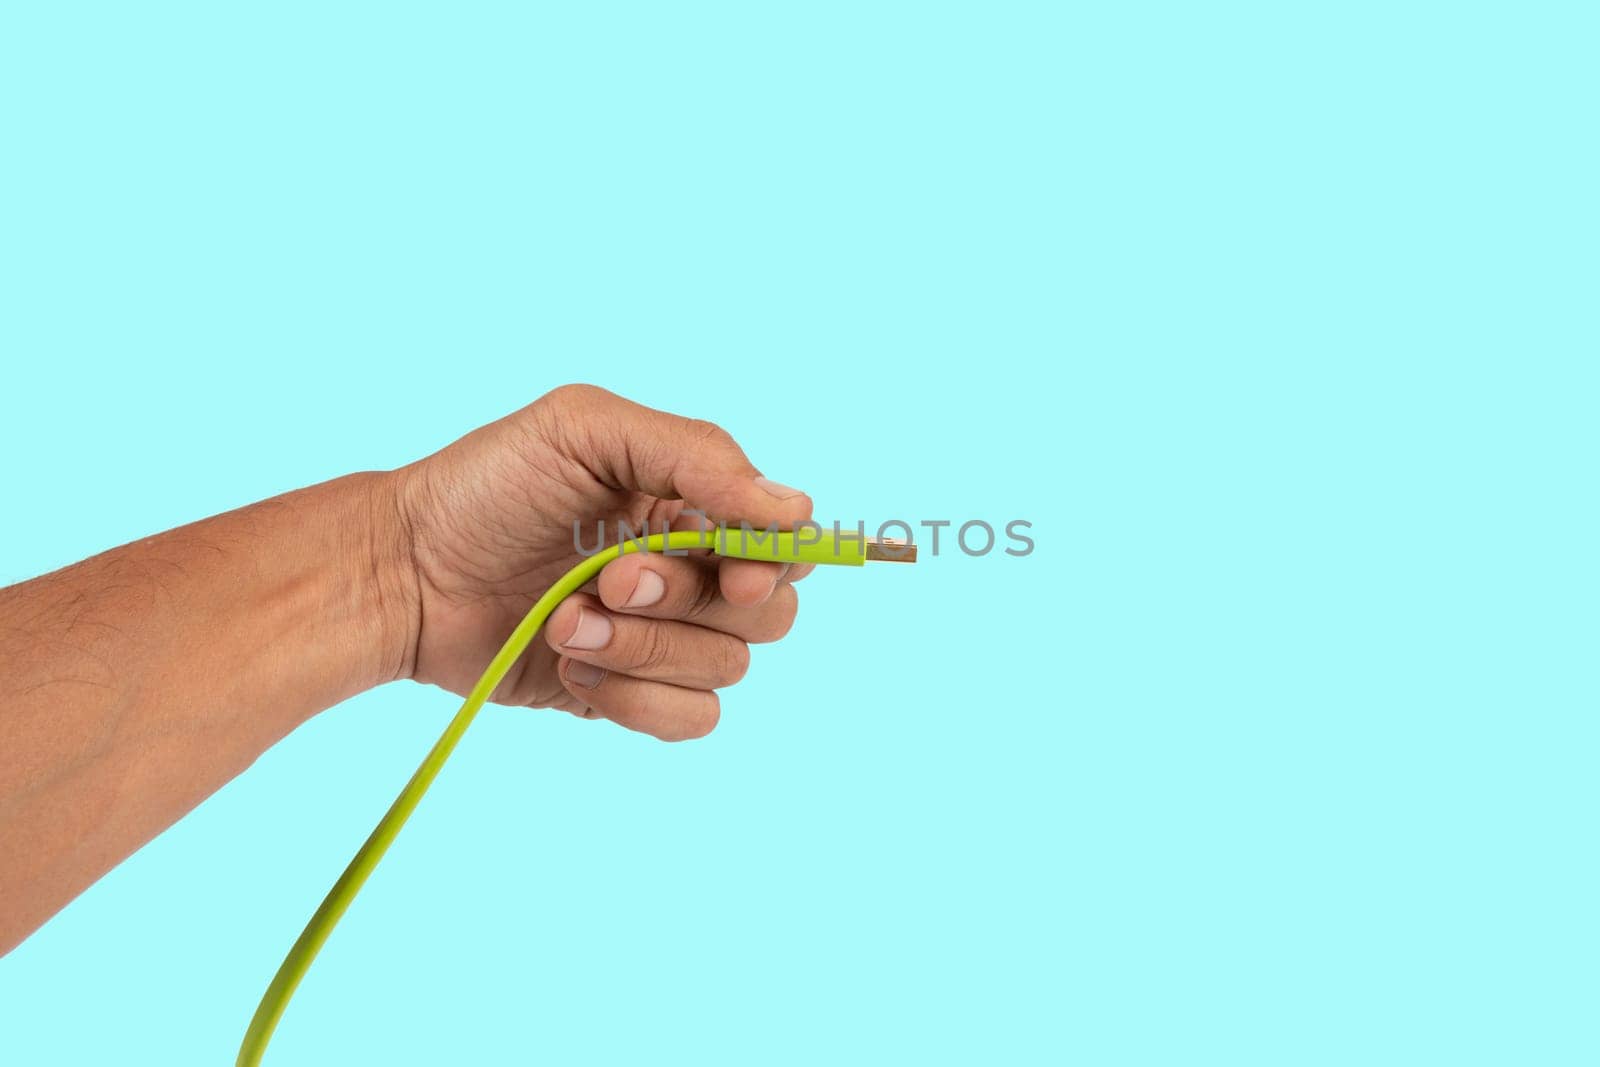 Black male hand holding a USB charger plug isolated on cyan background. High quality photo